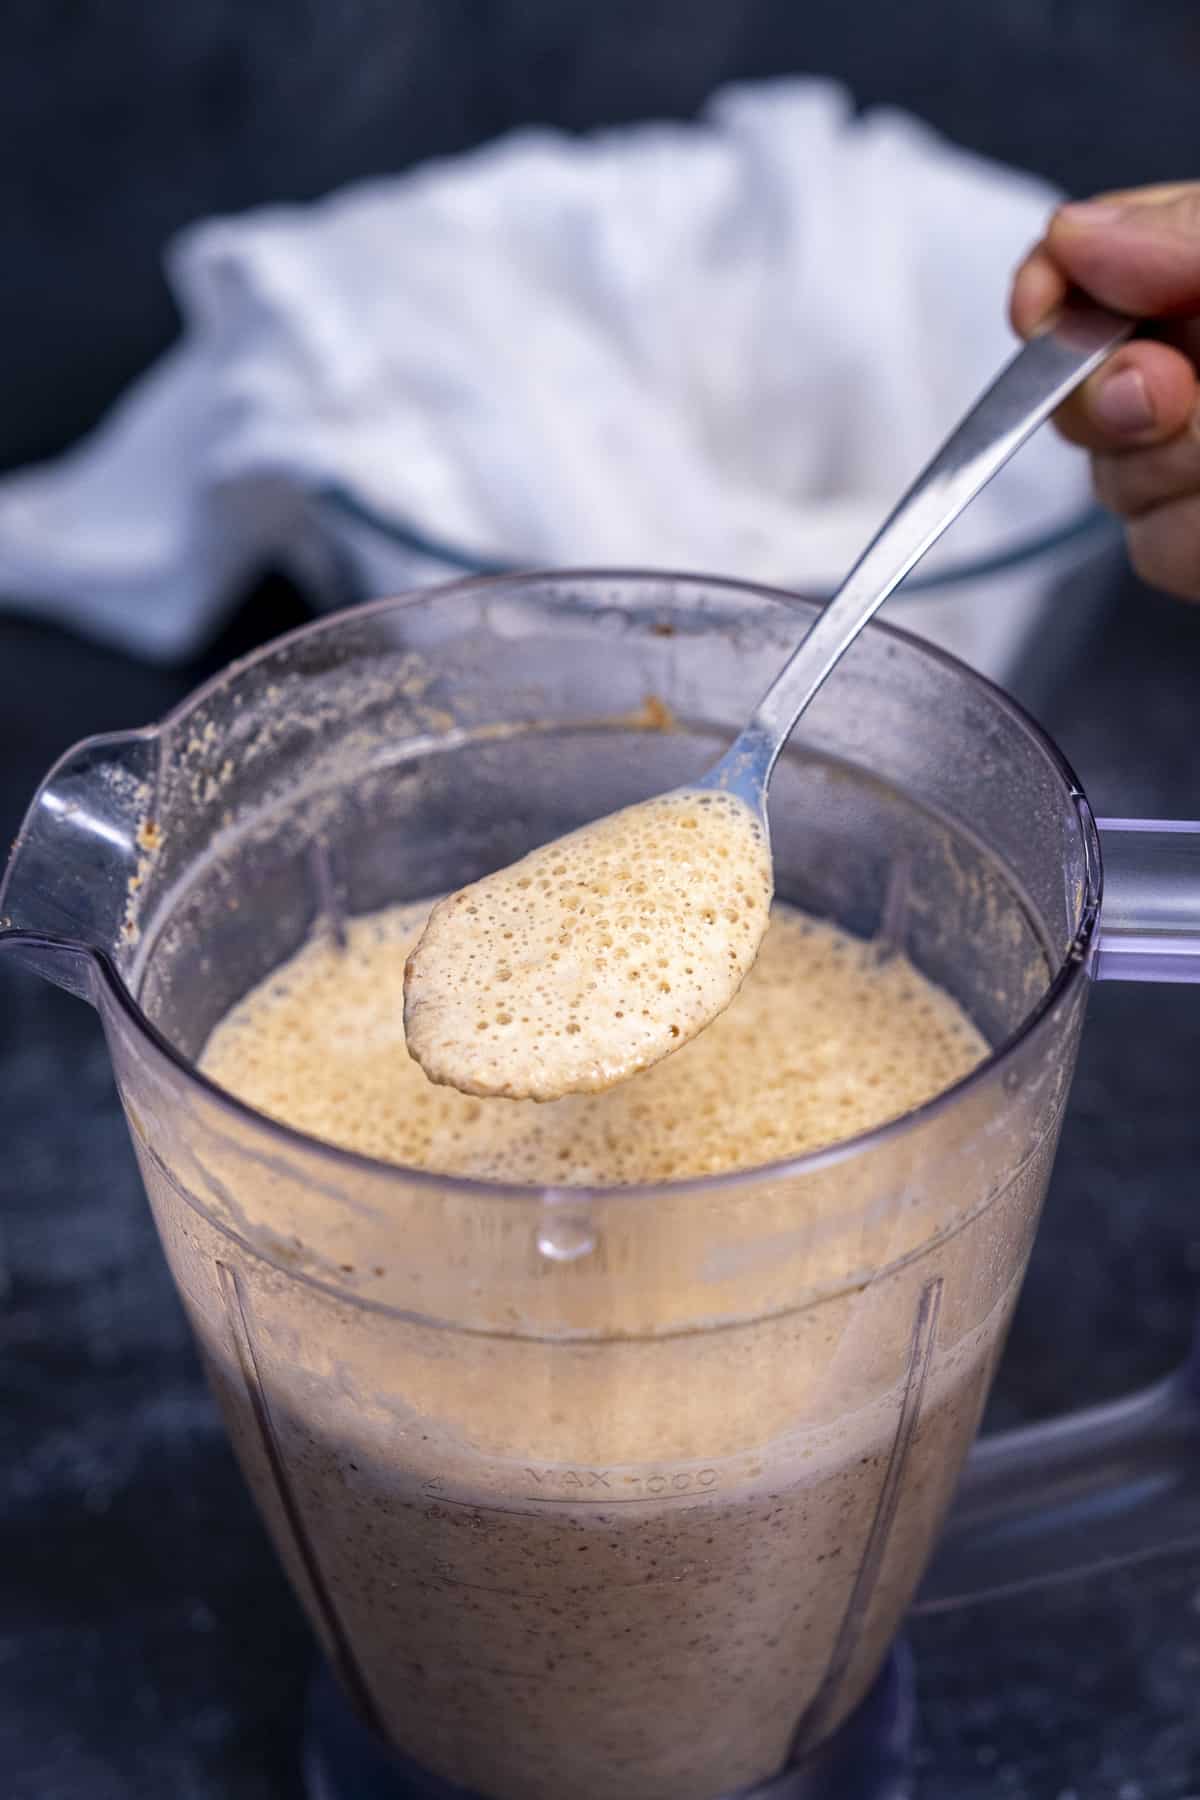 A hand holding a spoon of blended almond and water mixture over the blender container.